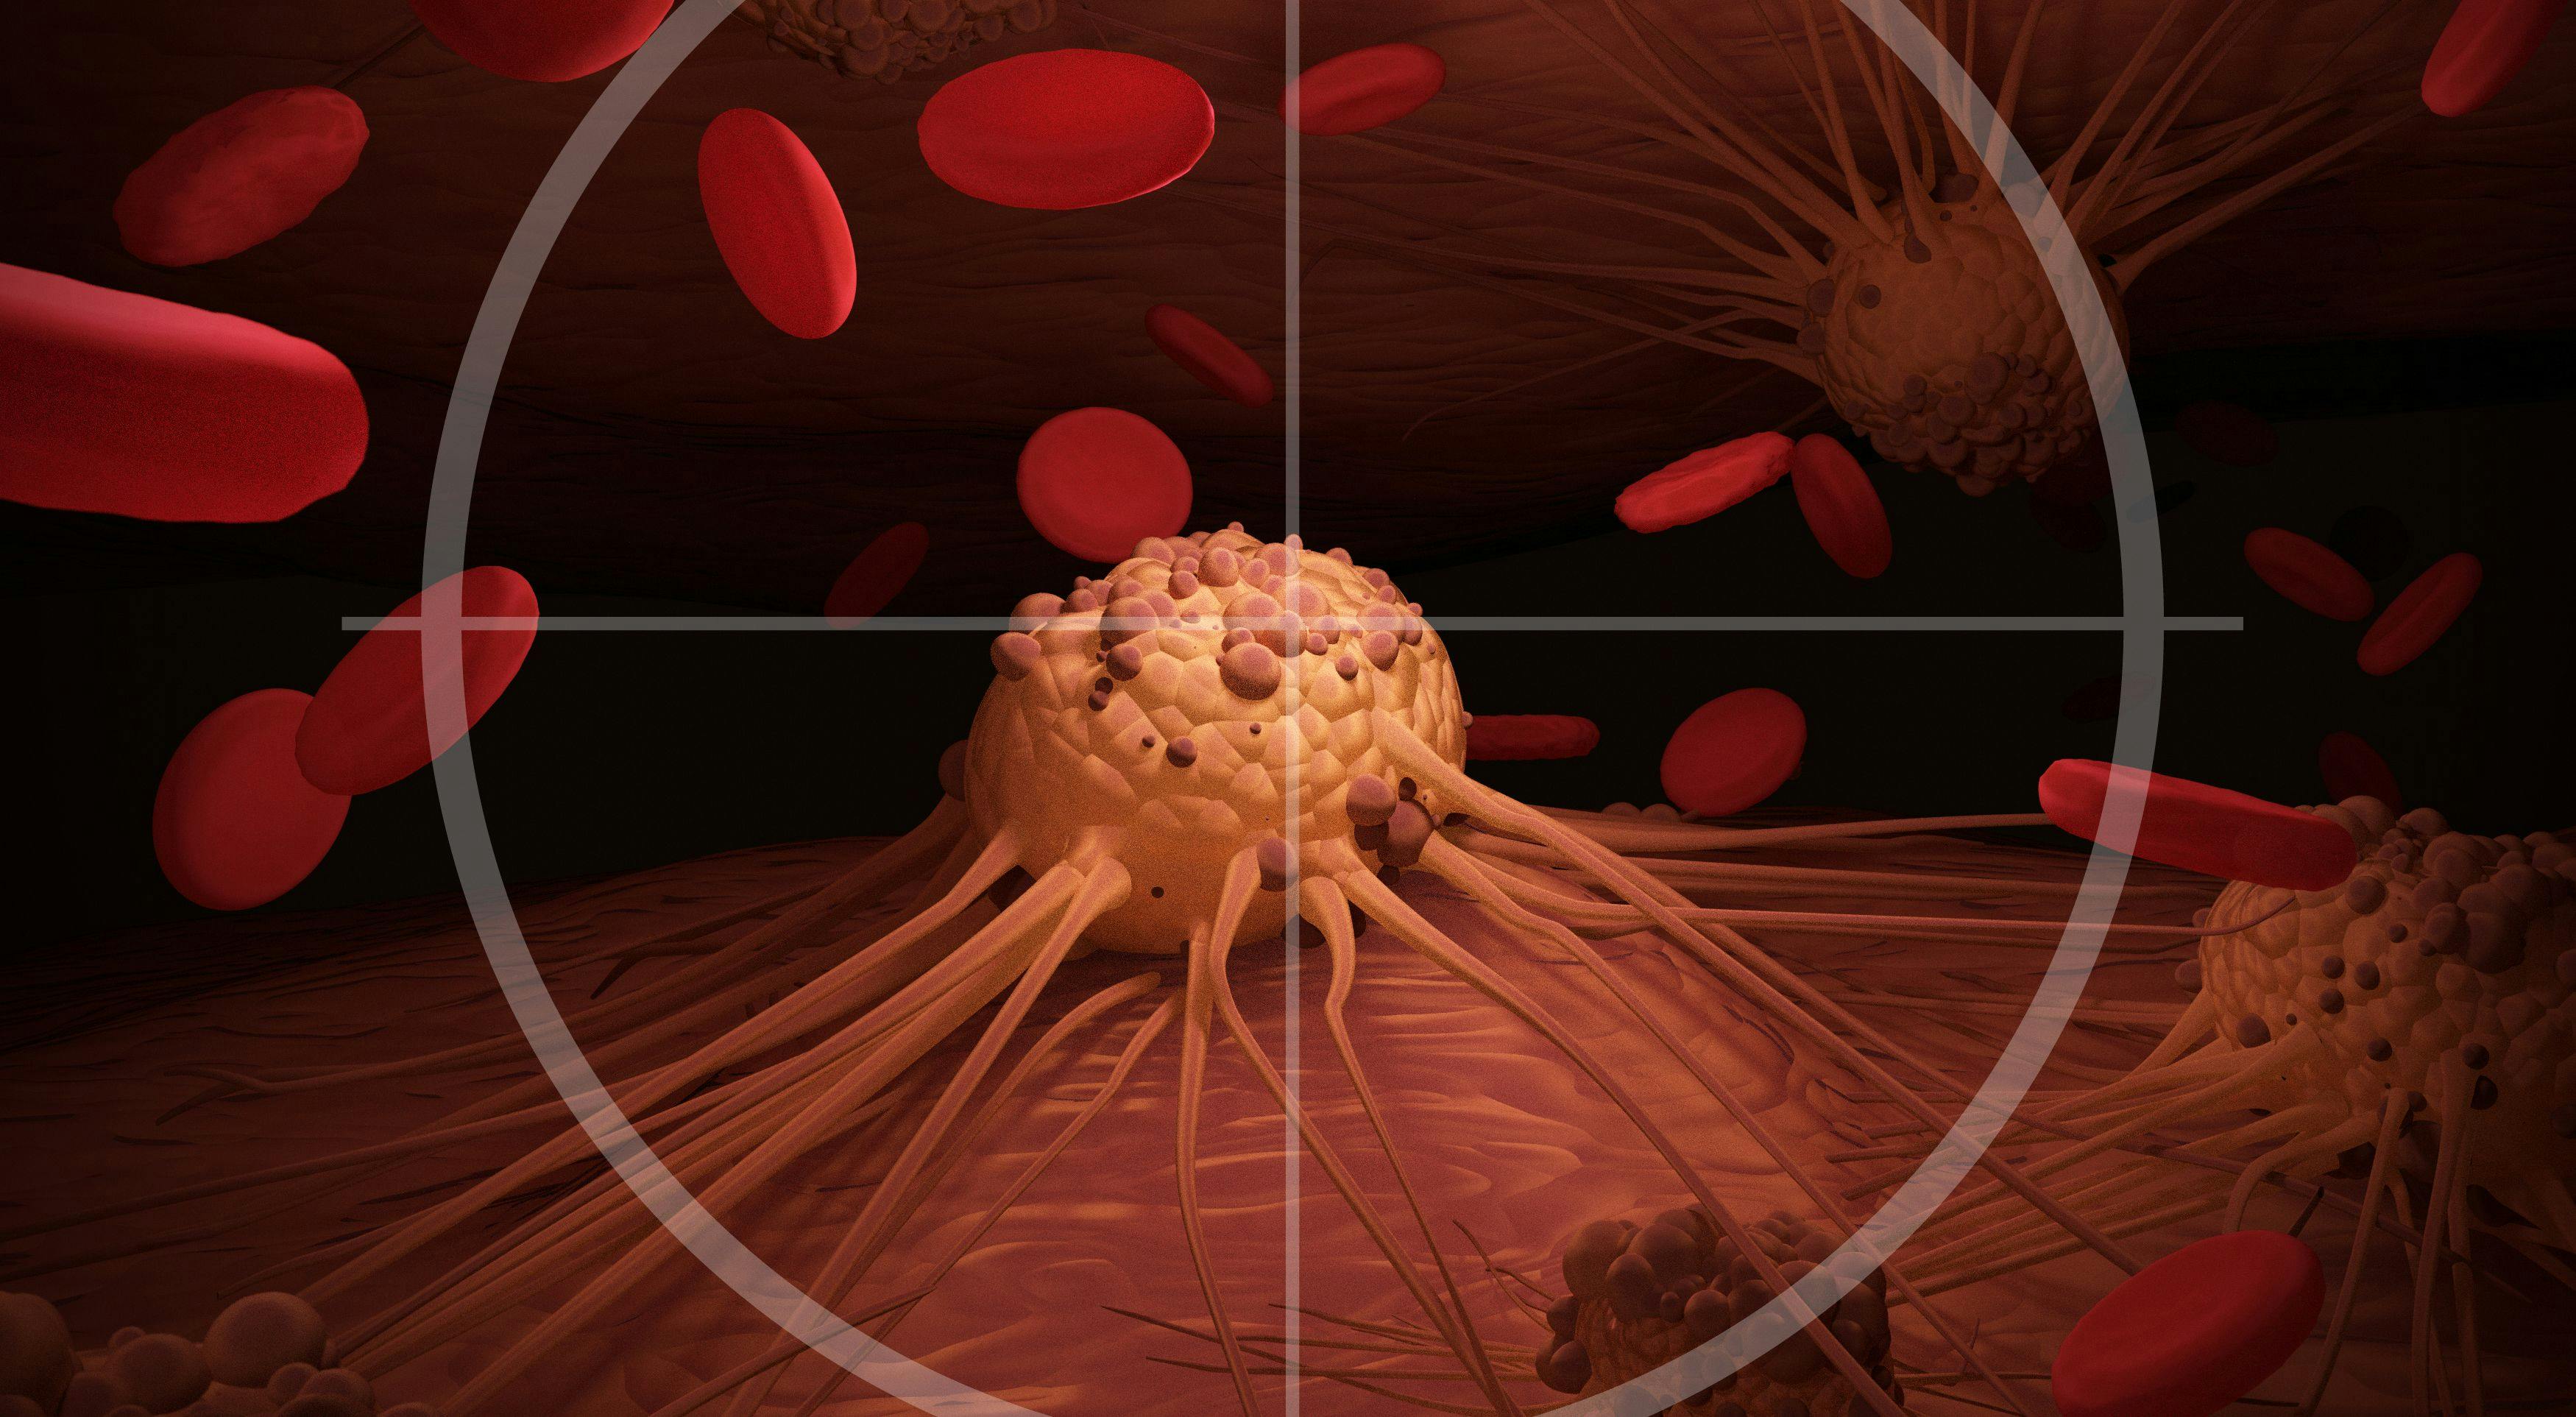 T cell with a target on a cancer cell — conceptual image of immune system fighting cancer